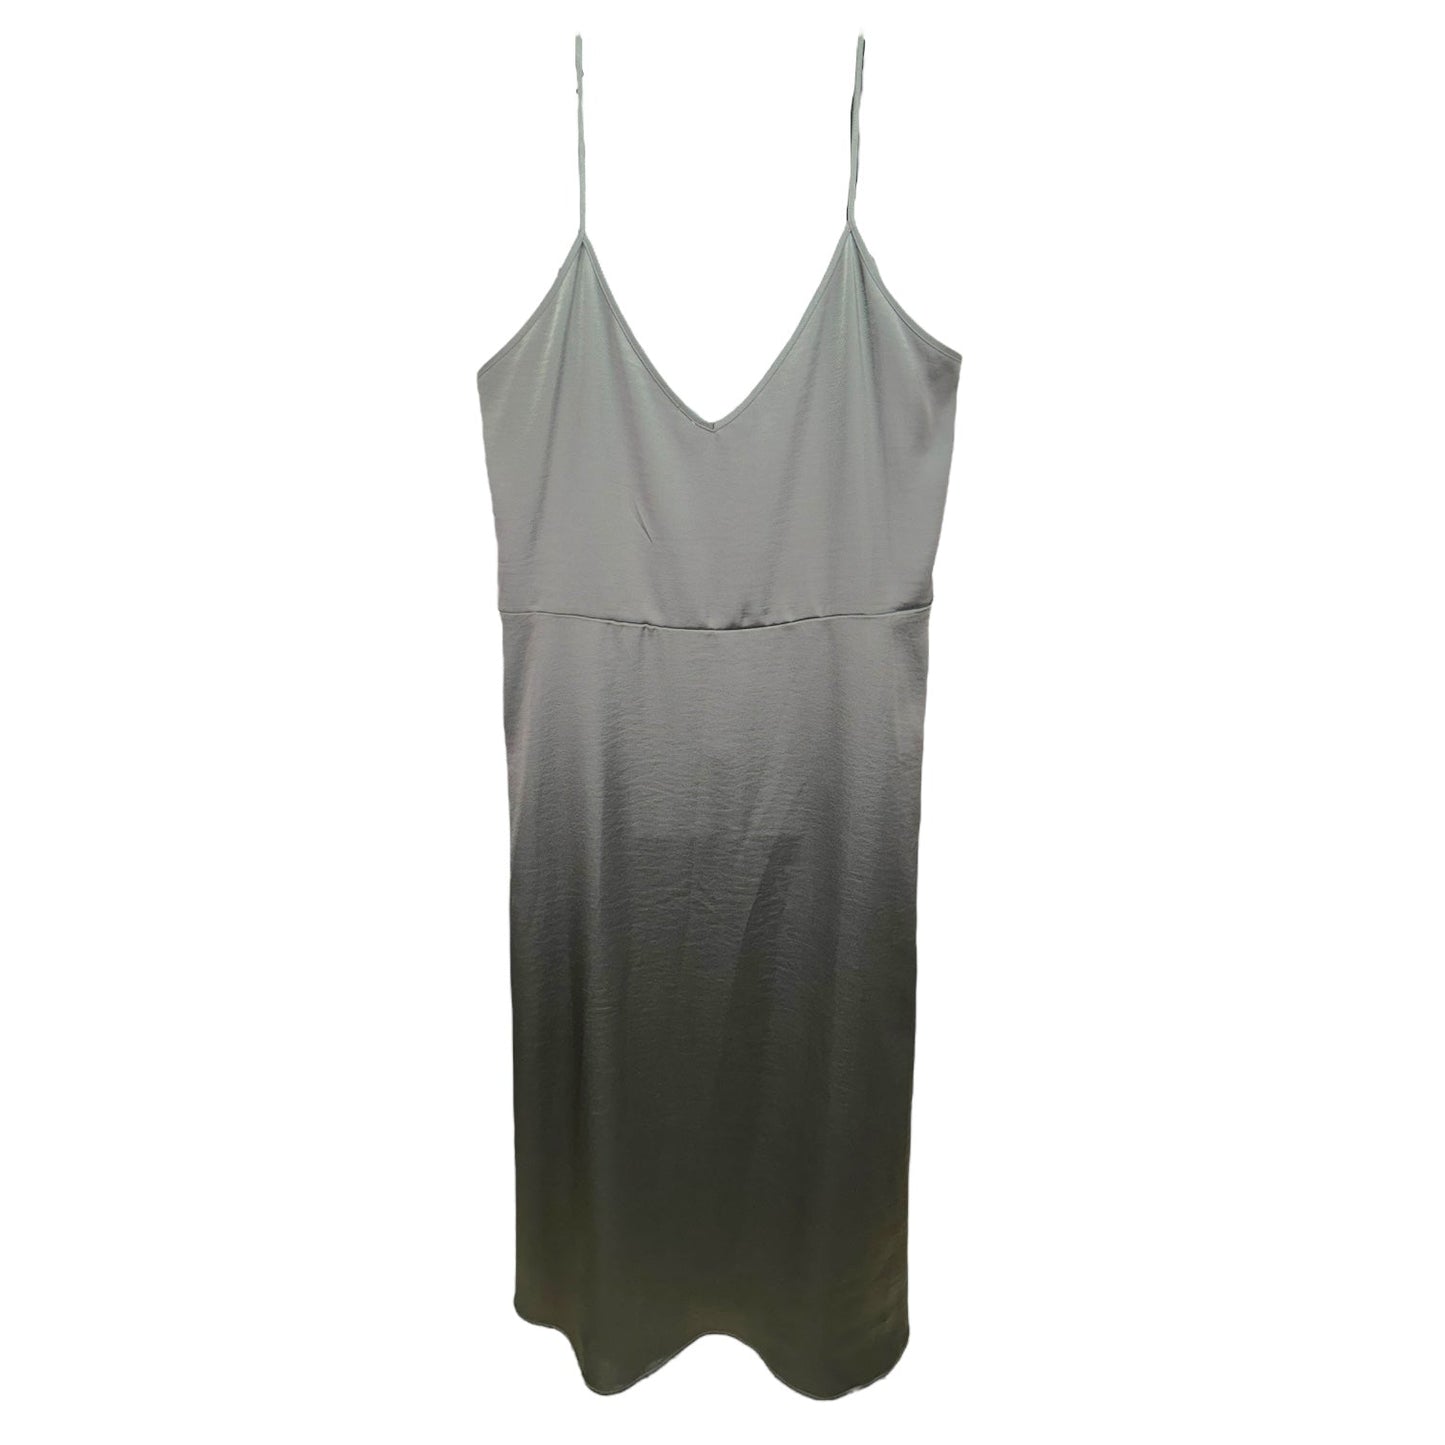 Midi Slip Dress in Carbon Daily Practice By Anthropologie, Size 2x